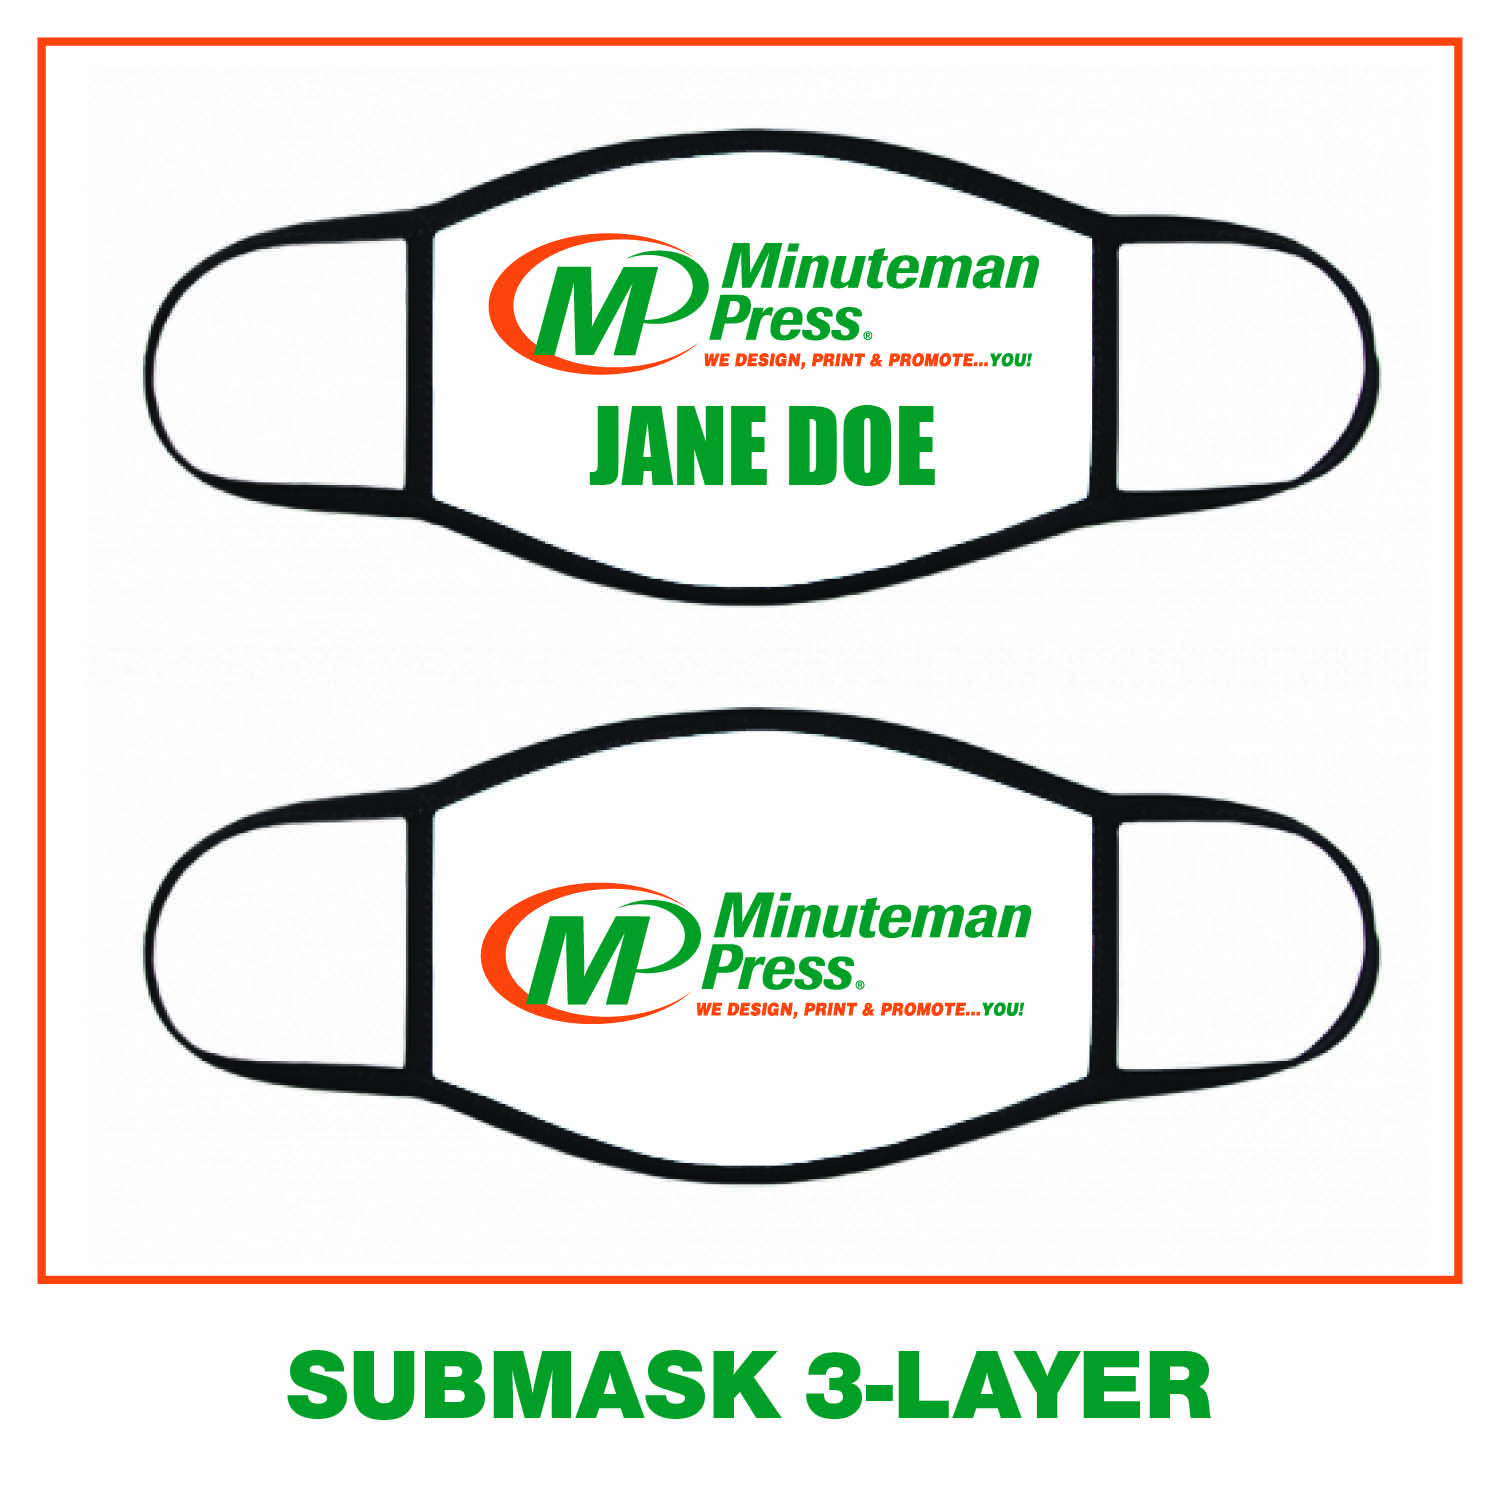 Submask 3-Layer (Small)